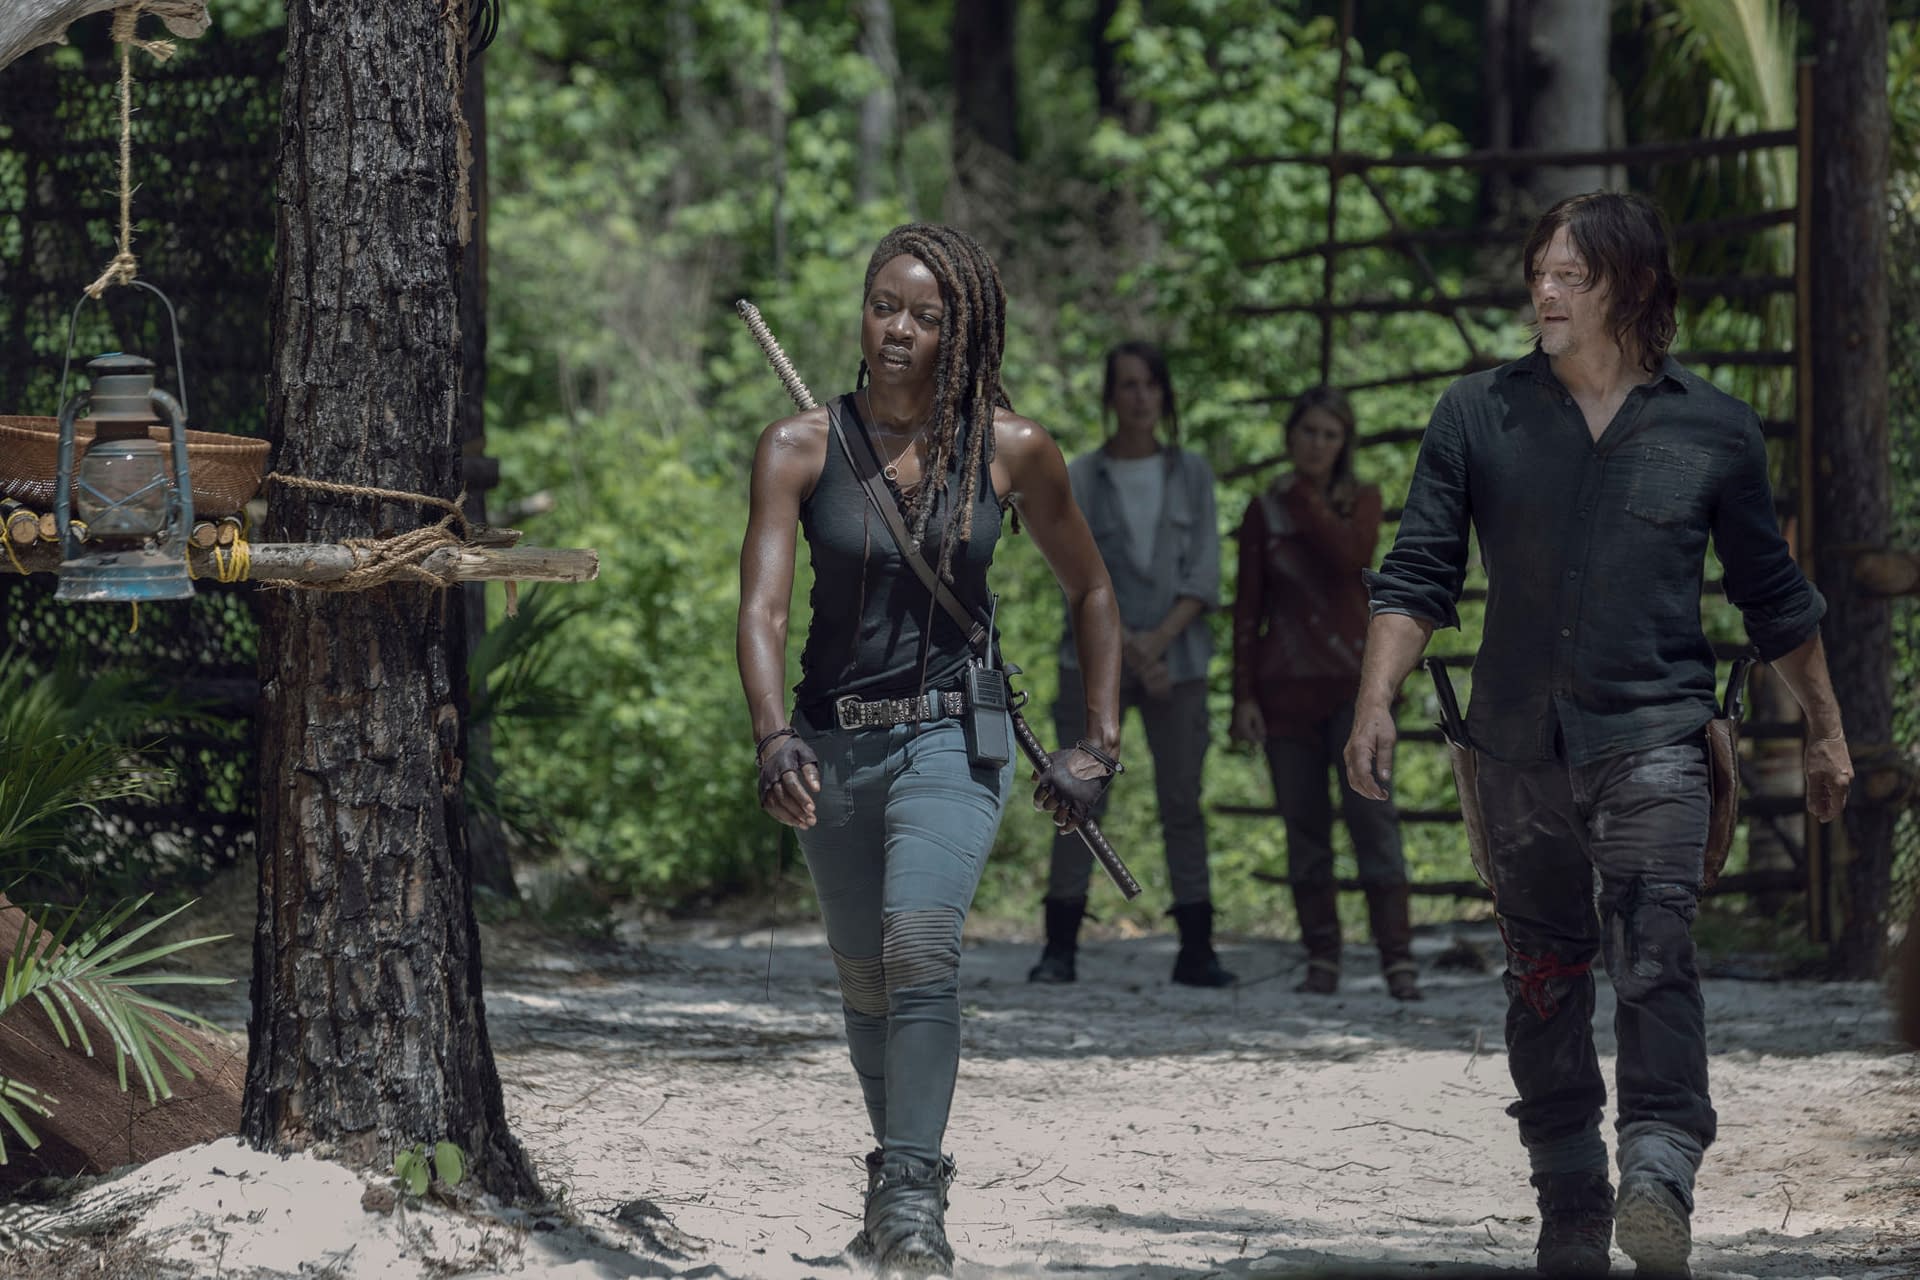 "The Walking Dead" Season 10: Angela Kang &#8211; Carol &#038; Daryl "One of the Strongest Relationships in the Show"